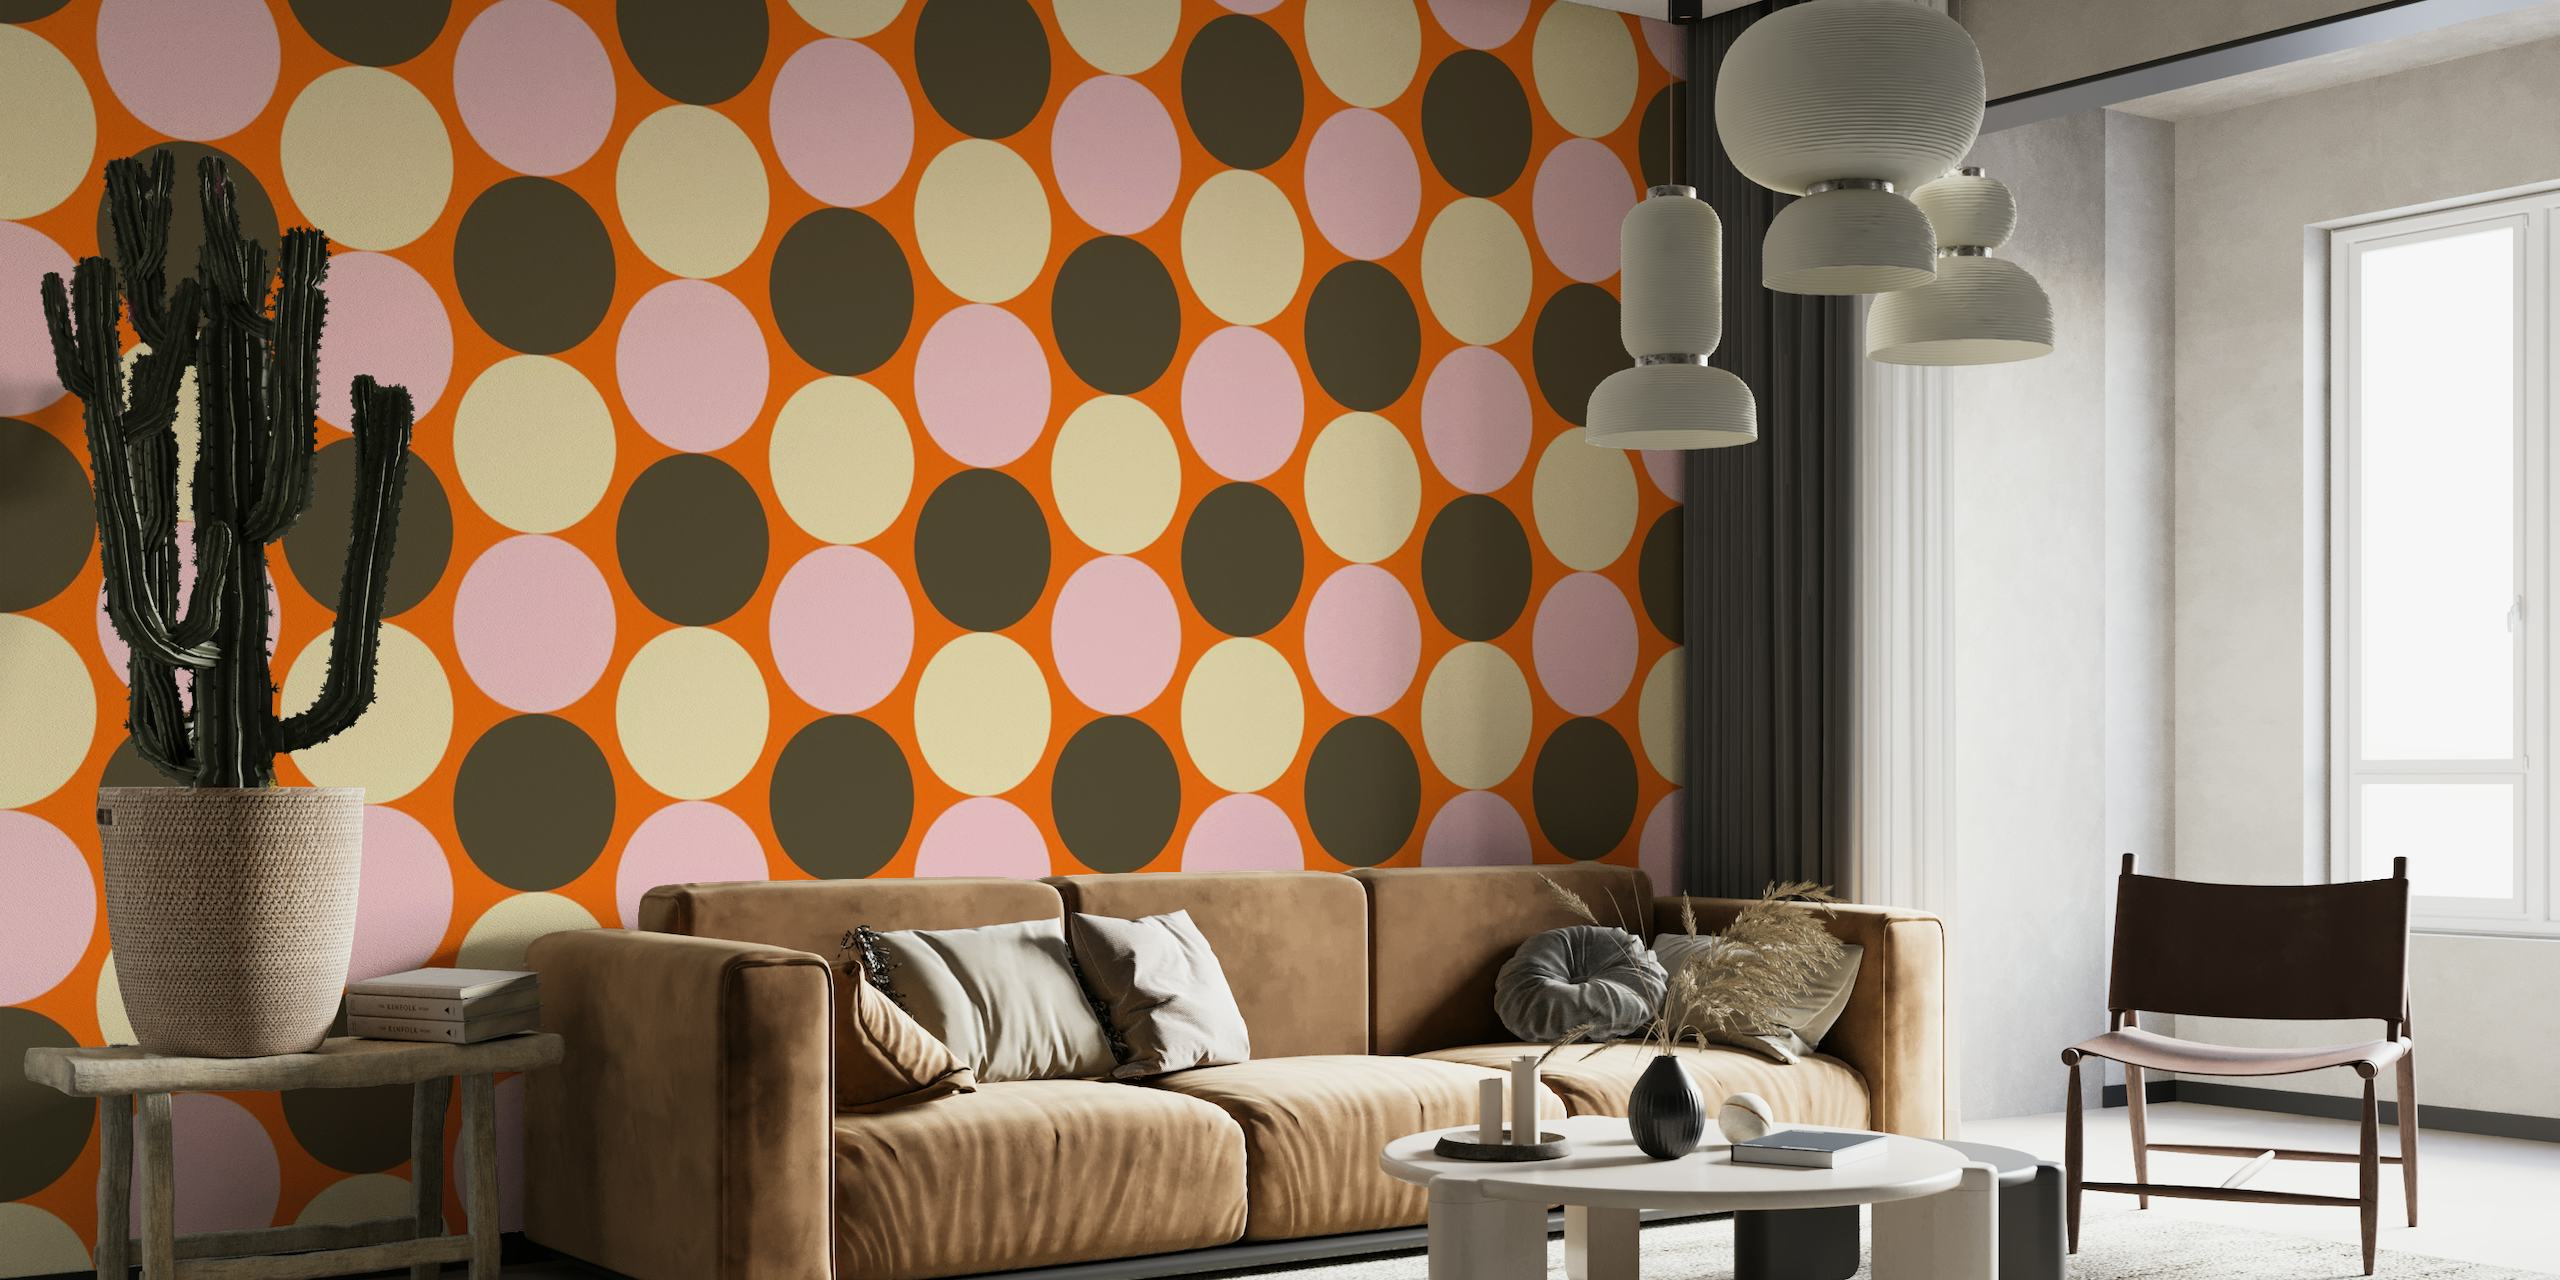 Mid-century style wall mural with orange, pink, and brown circles on a cream background